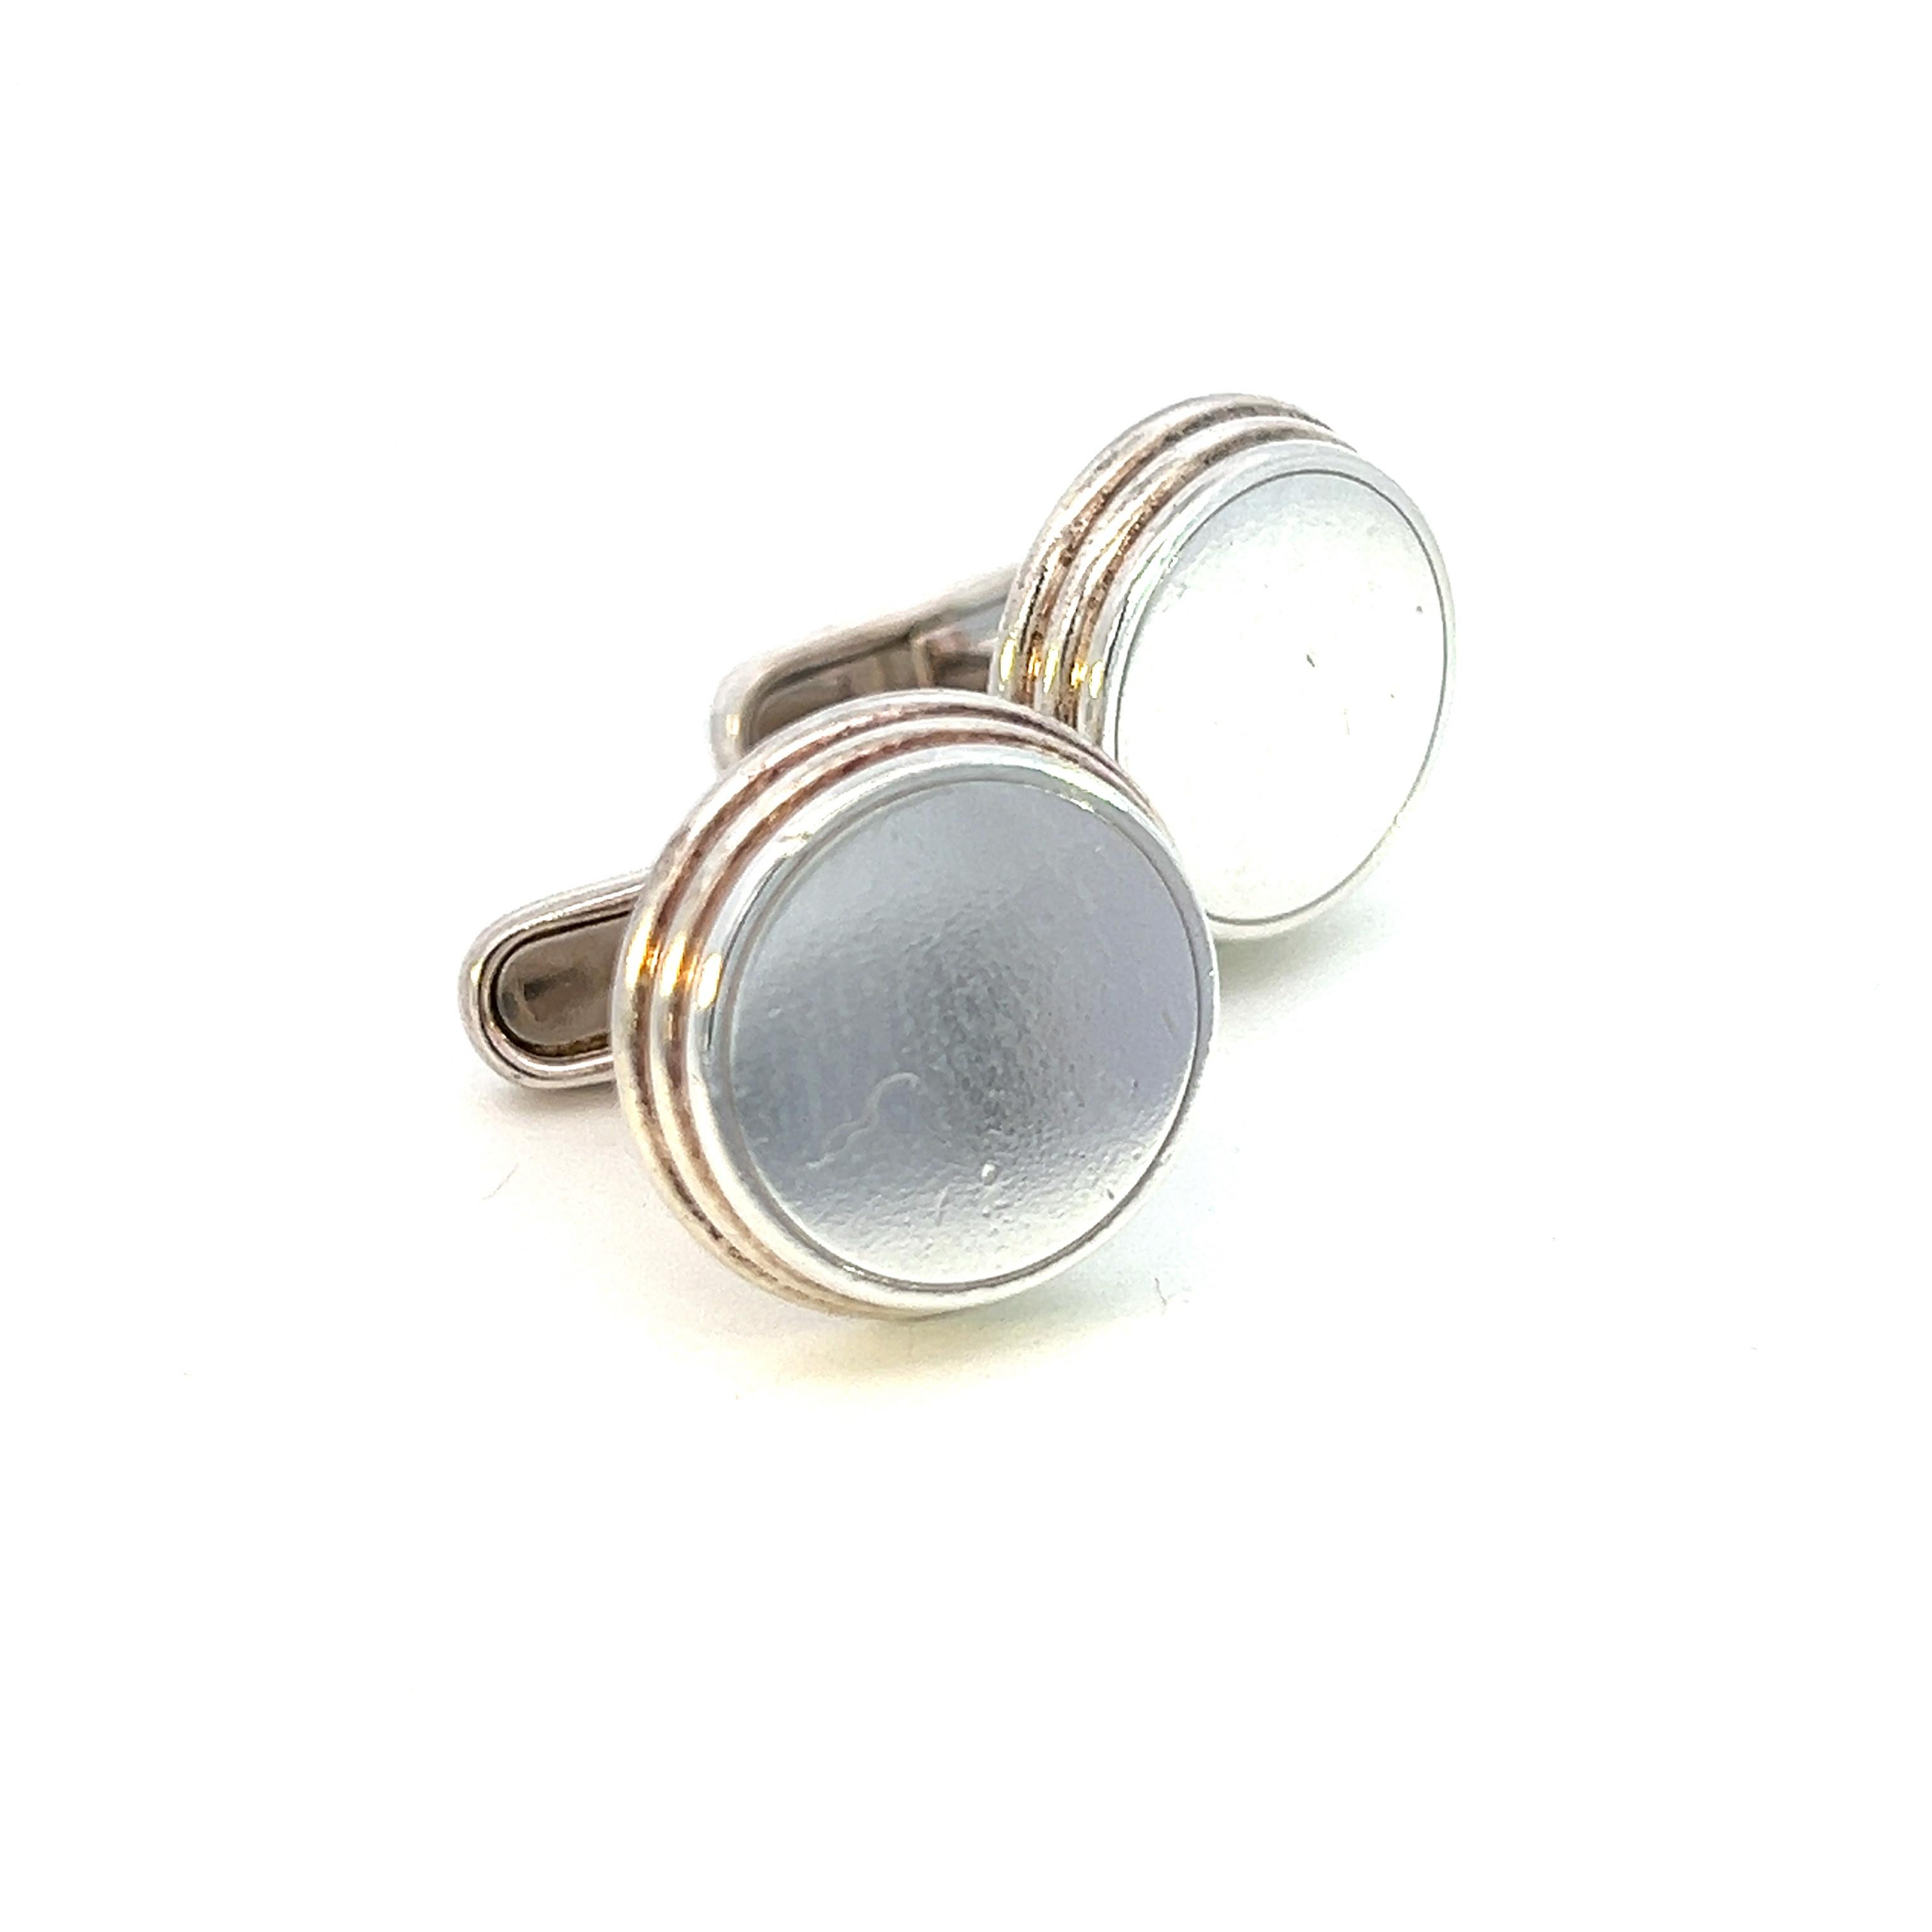 Bulgari Bvlgari Estate Mens Cufflinks Sterling Silver In Good Condition For Sale In Brooklyn, NY